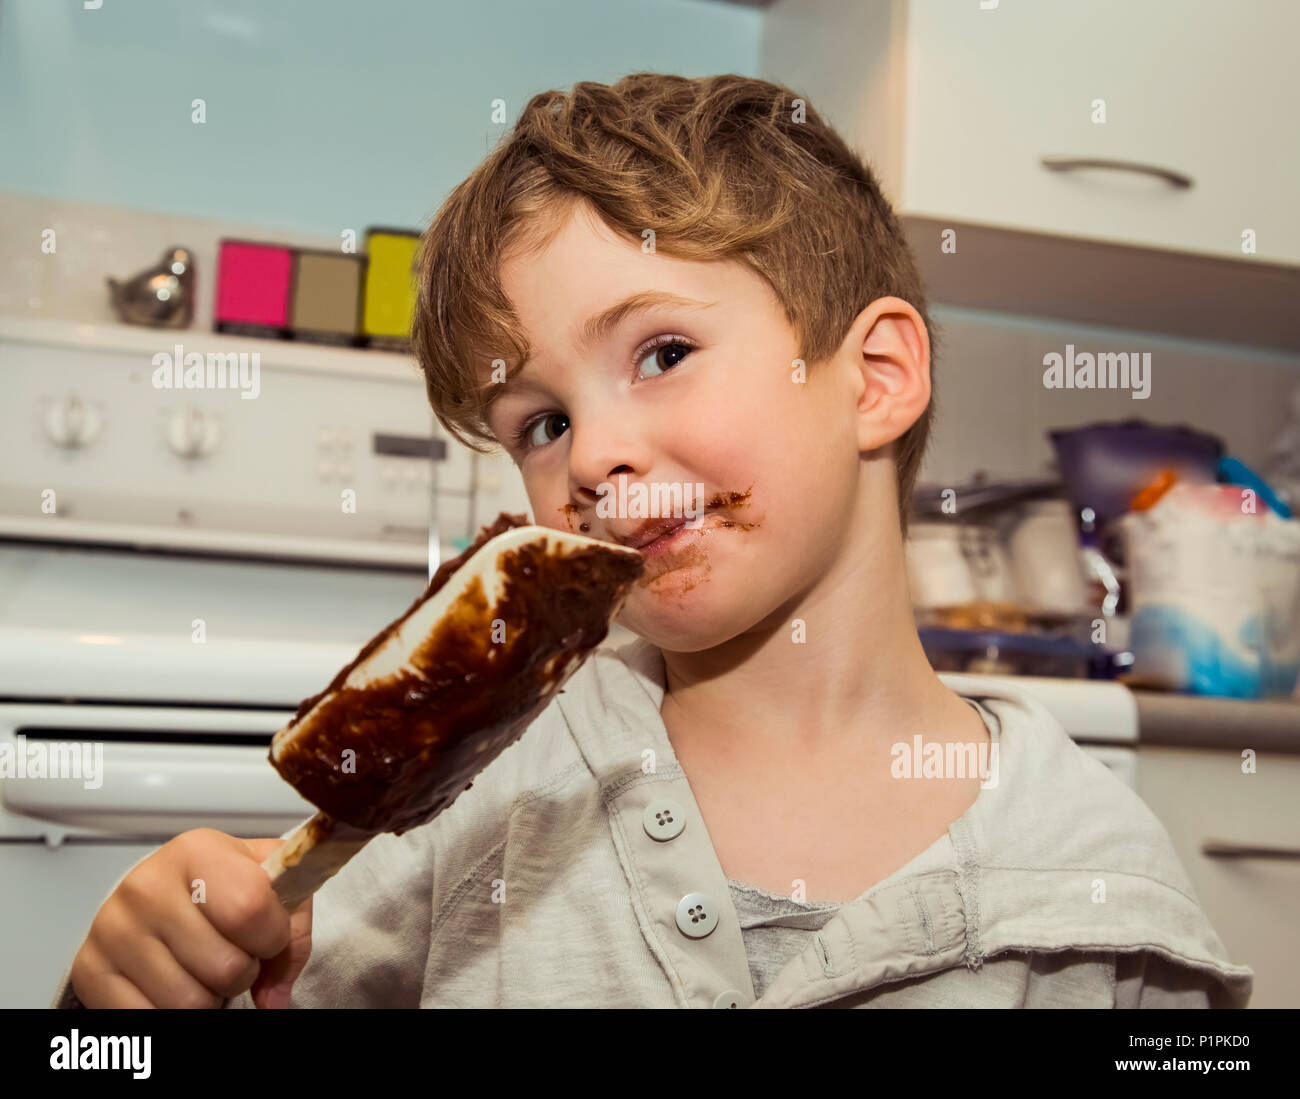 A grinning young boy with a messy face licks the chocolate from the spatula after making fudge; Langley, British Columbia, Canada Stock Photo